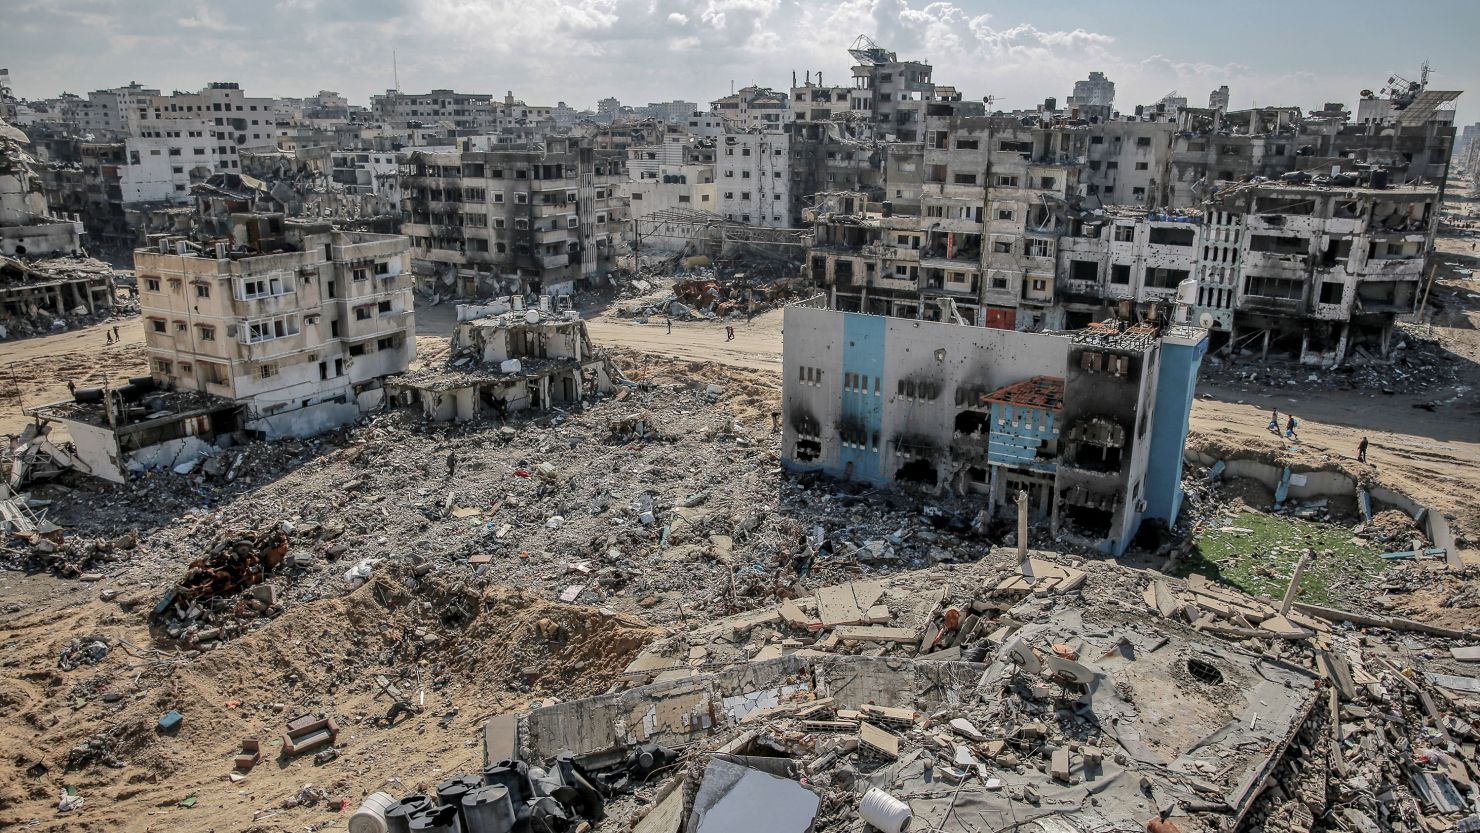 The Al-Maqoussi towers area in Gaza City on February 3.